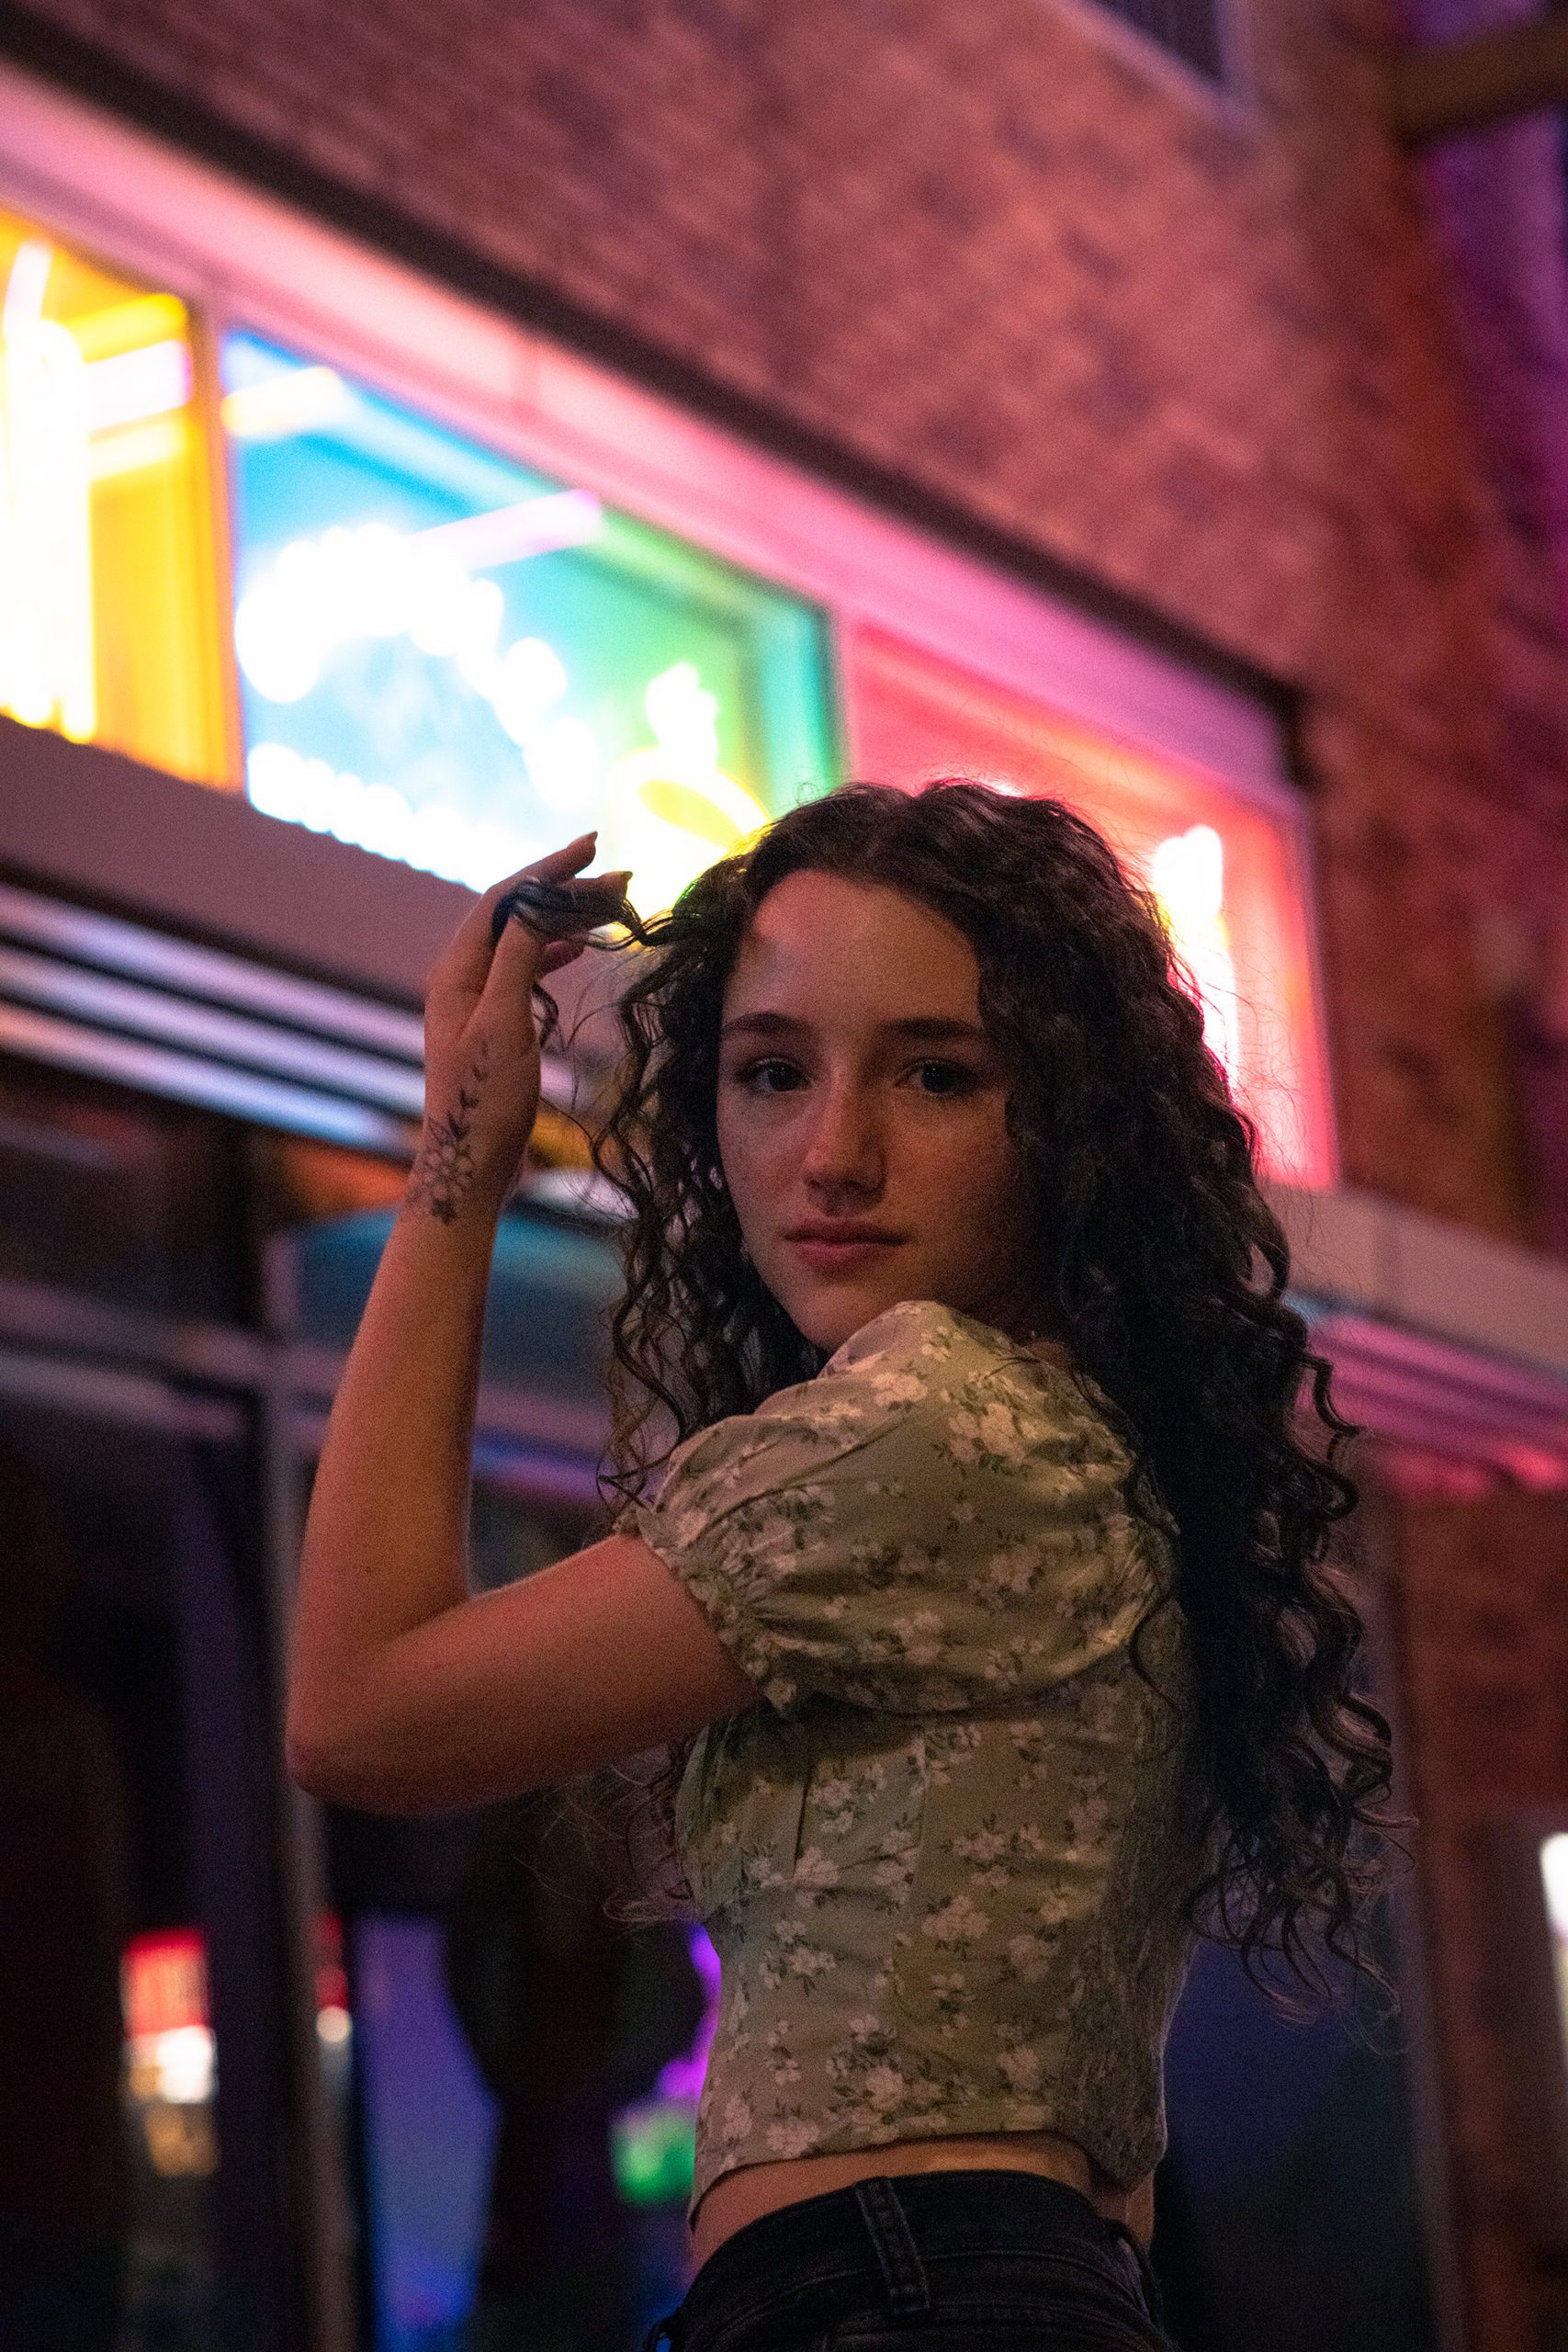 Senior Girl at night in urban setting with neon lights.